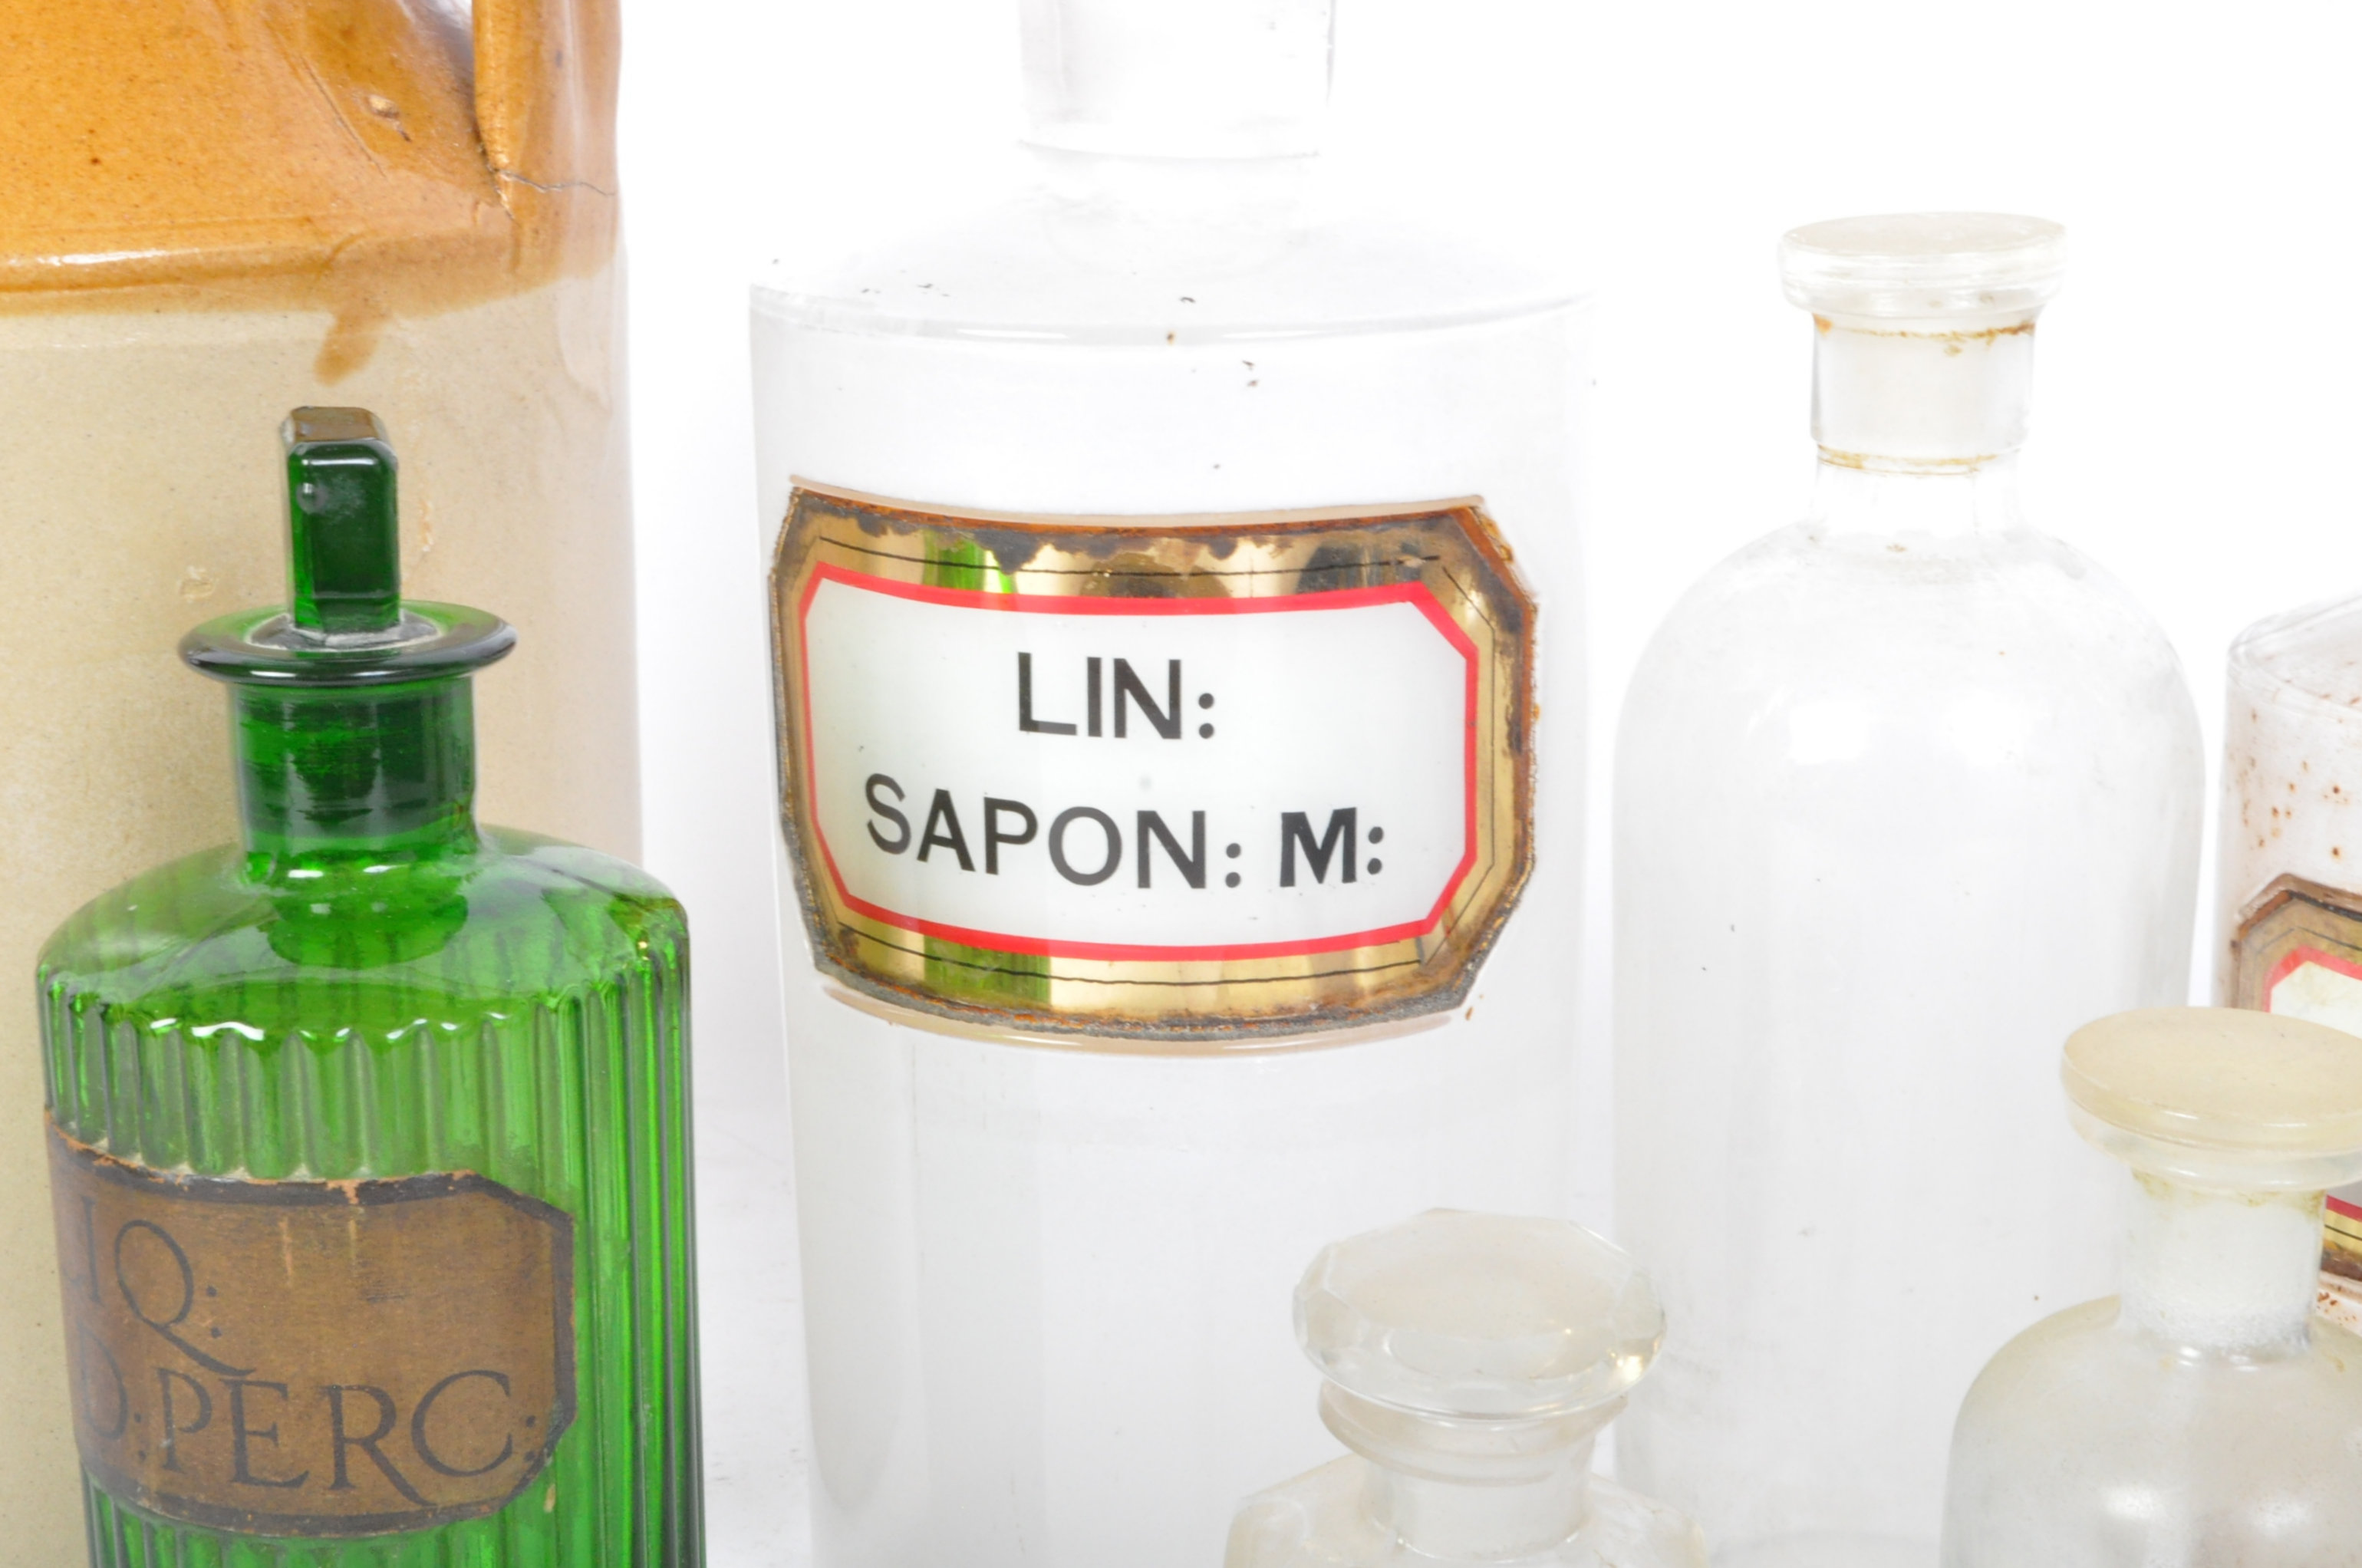 COLLECTION OF EARLY 20TH CENTURY PHARMACY GLASS BOTTLES - Image 3 of 5